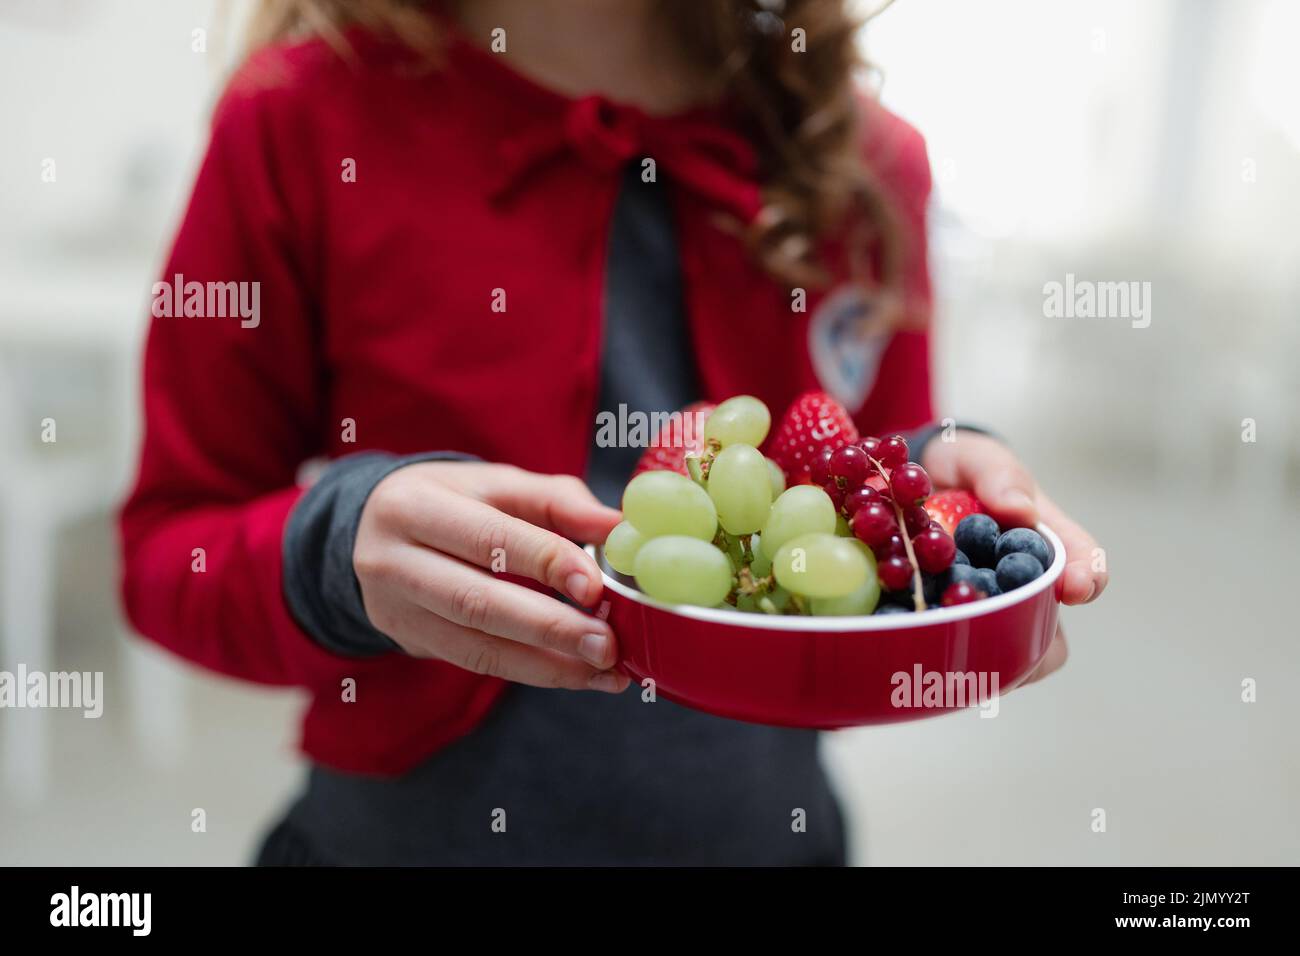 Closse-up of schoolchild having healthy fruit lunch in school canteen. Stock Photo